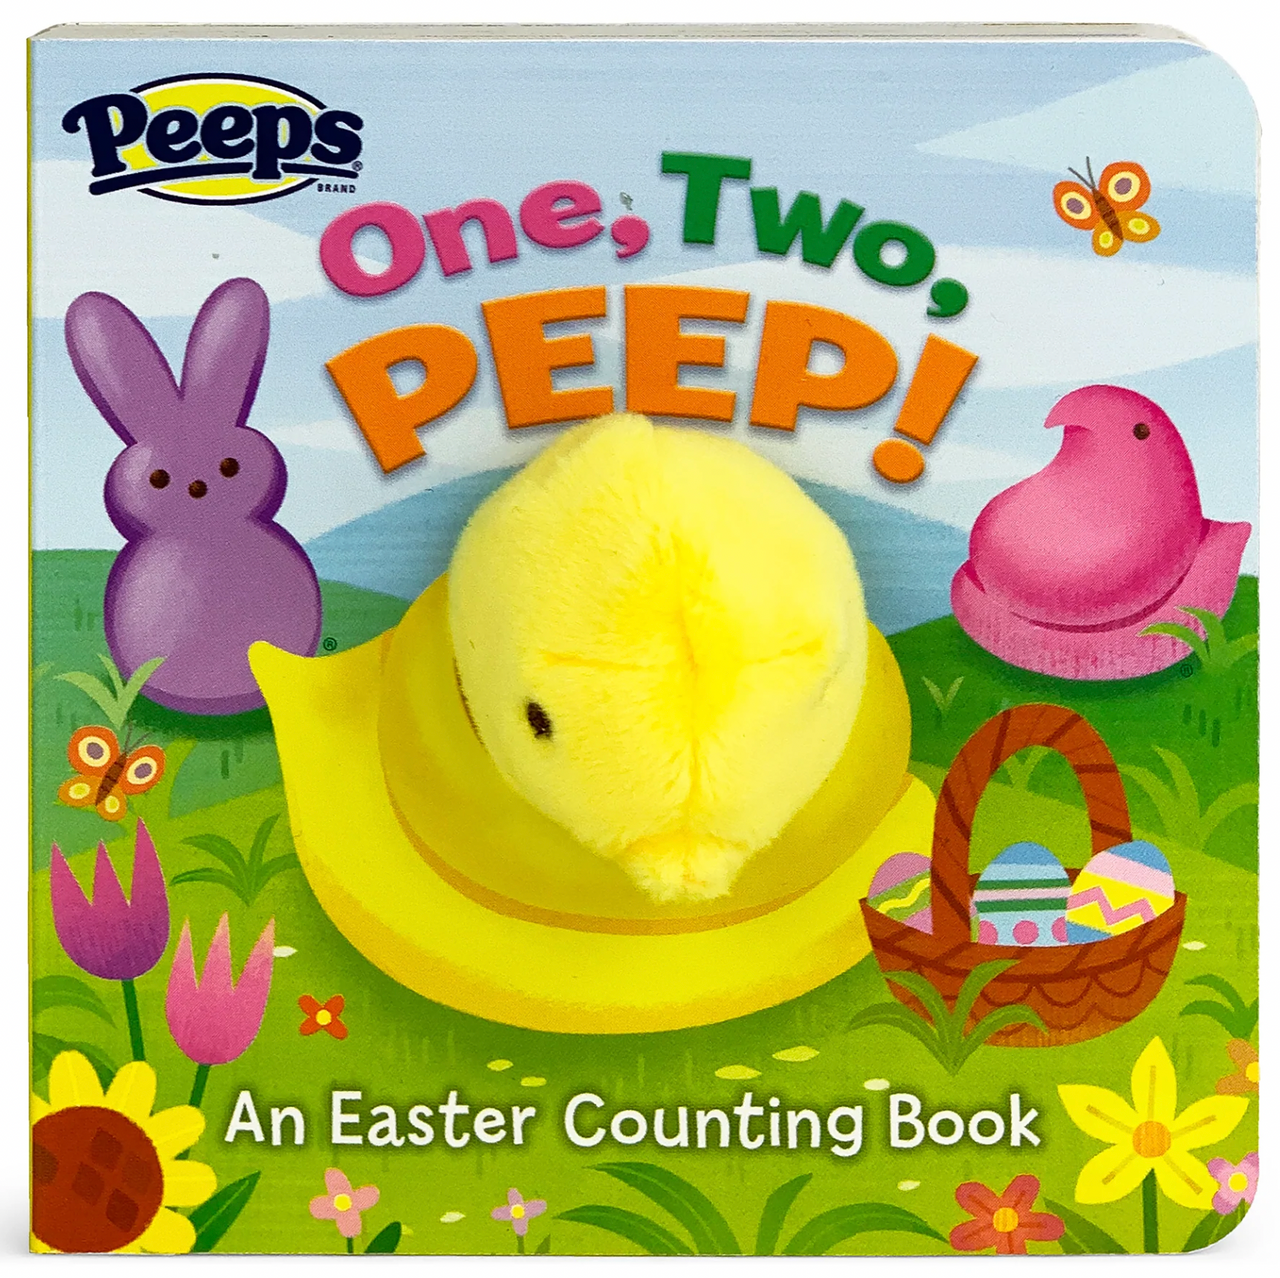 One, Two, Peep!